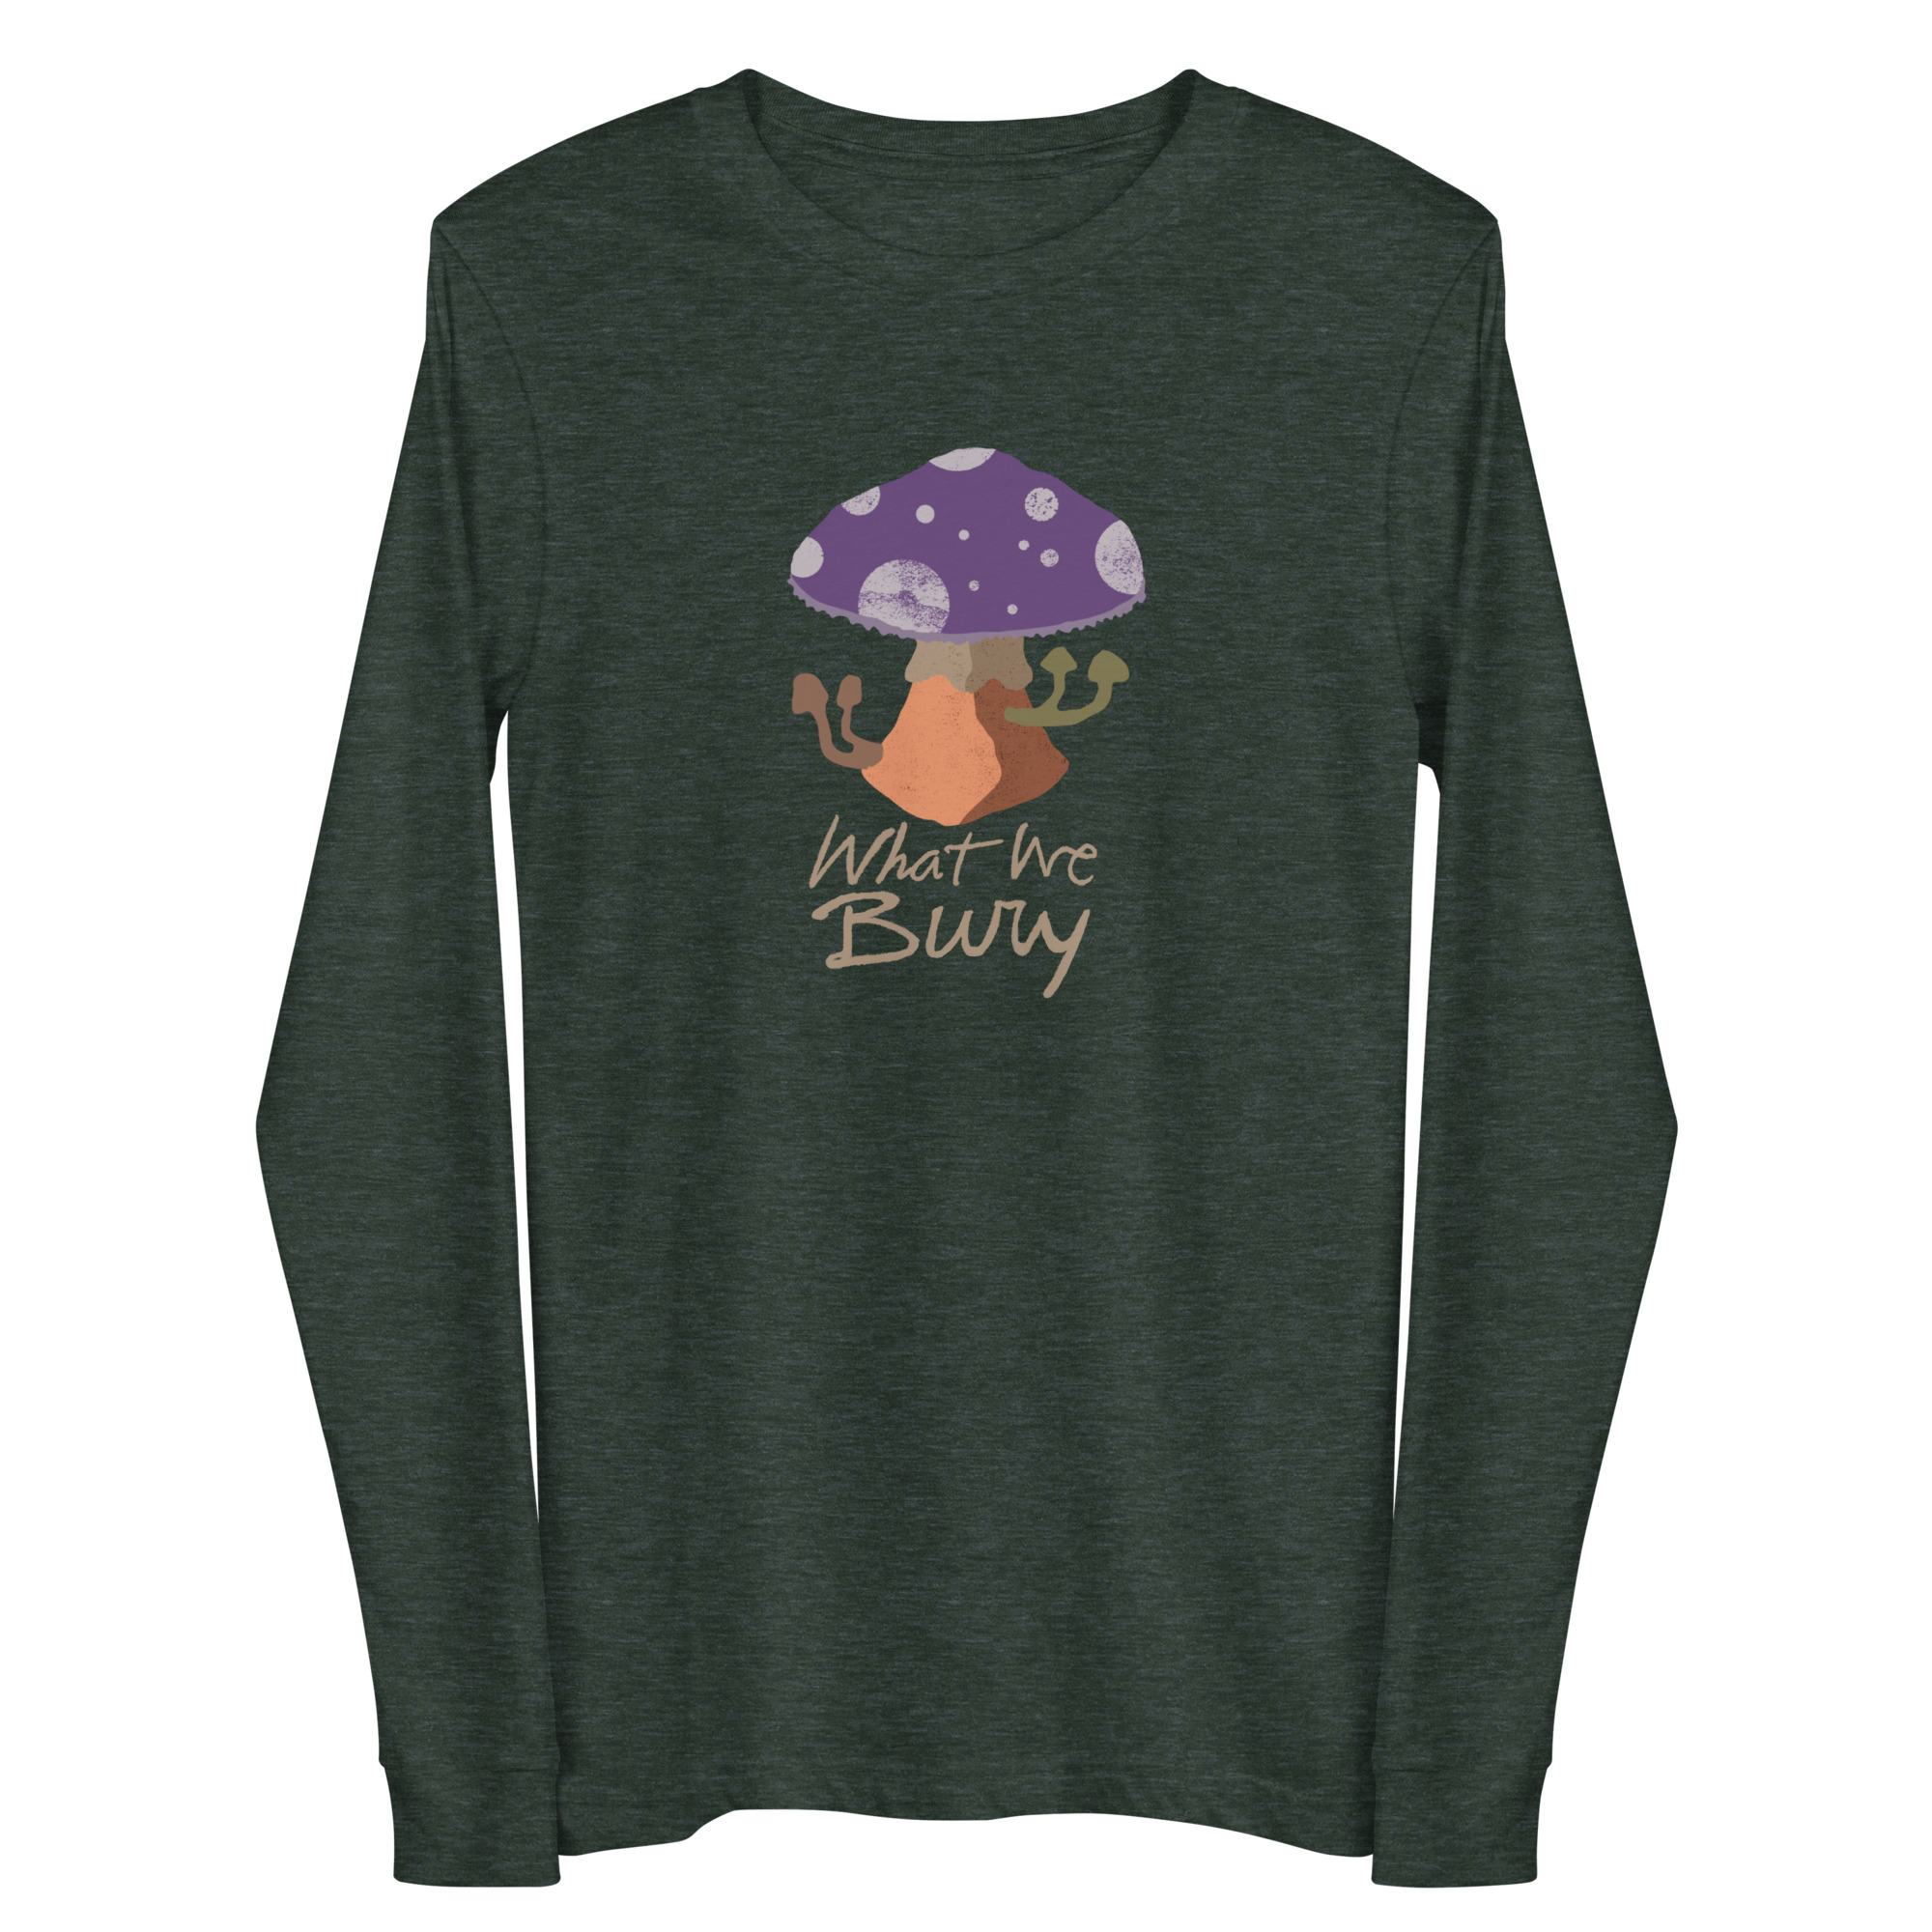 Heather forest green long-sleeve t-shirt featuring a purple toadstool mushroom with four smaller mushrooms budding from the stipe. Text underneath reads "What We Bury."